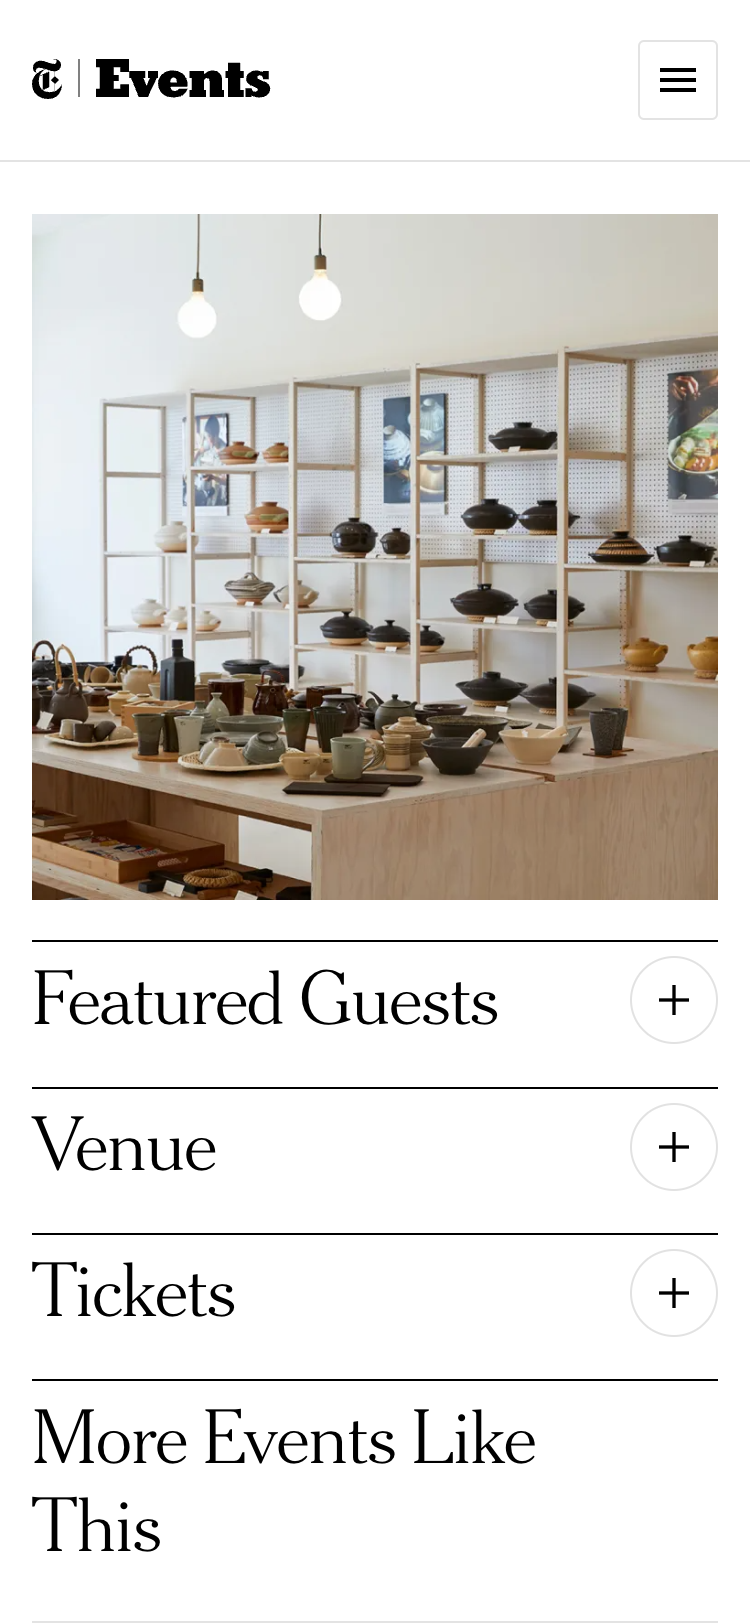 Screenshot of part of a single event page on a 375-pixel width mobile device. It shows an image and a part of the page that’s split into sections for featured guests, venue, tickets, and “More Events Like This.” Each section is collapsed in an accordion-style element and can be toggled open by clicking a round plus-sign button.